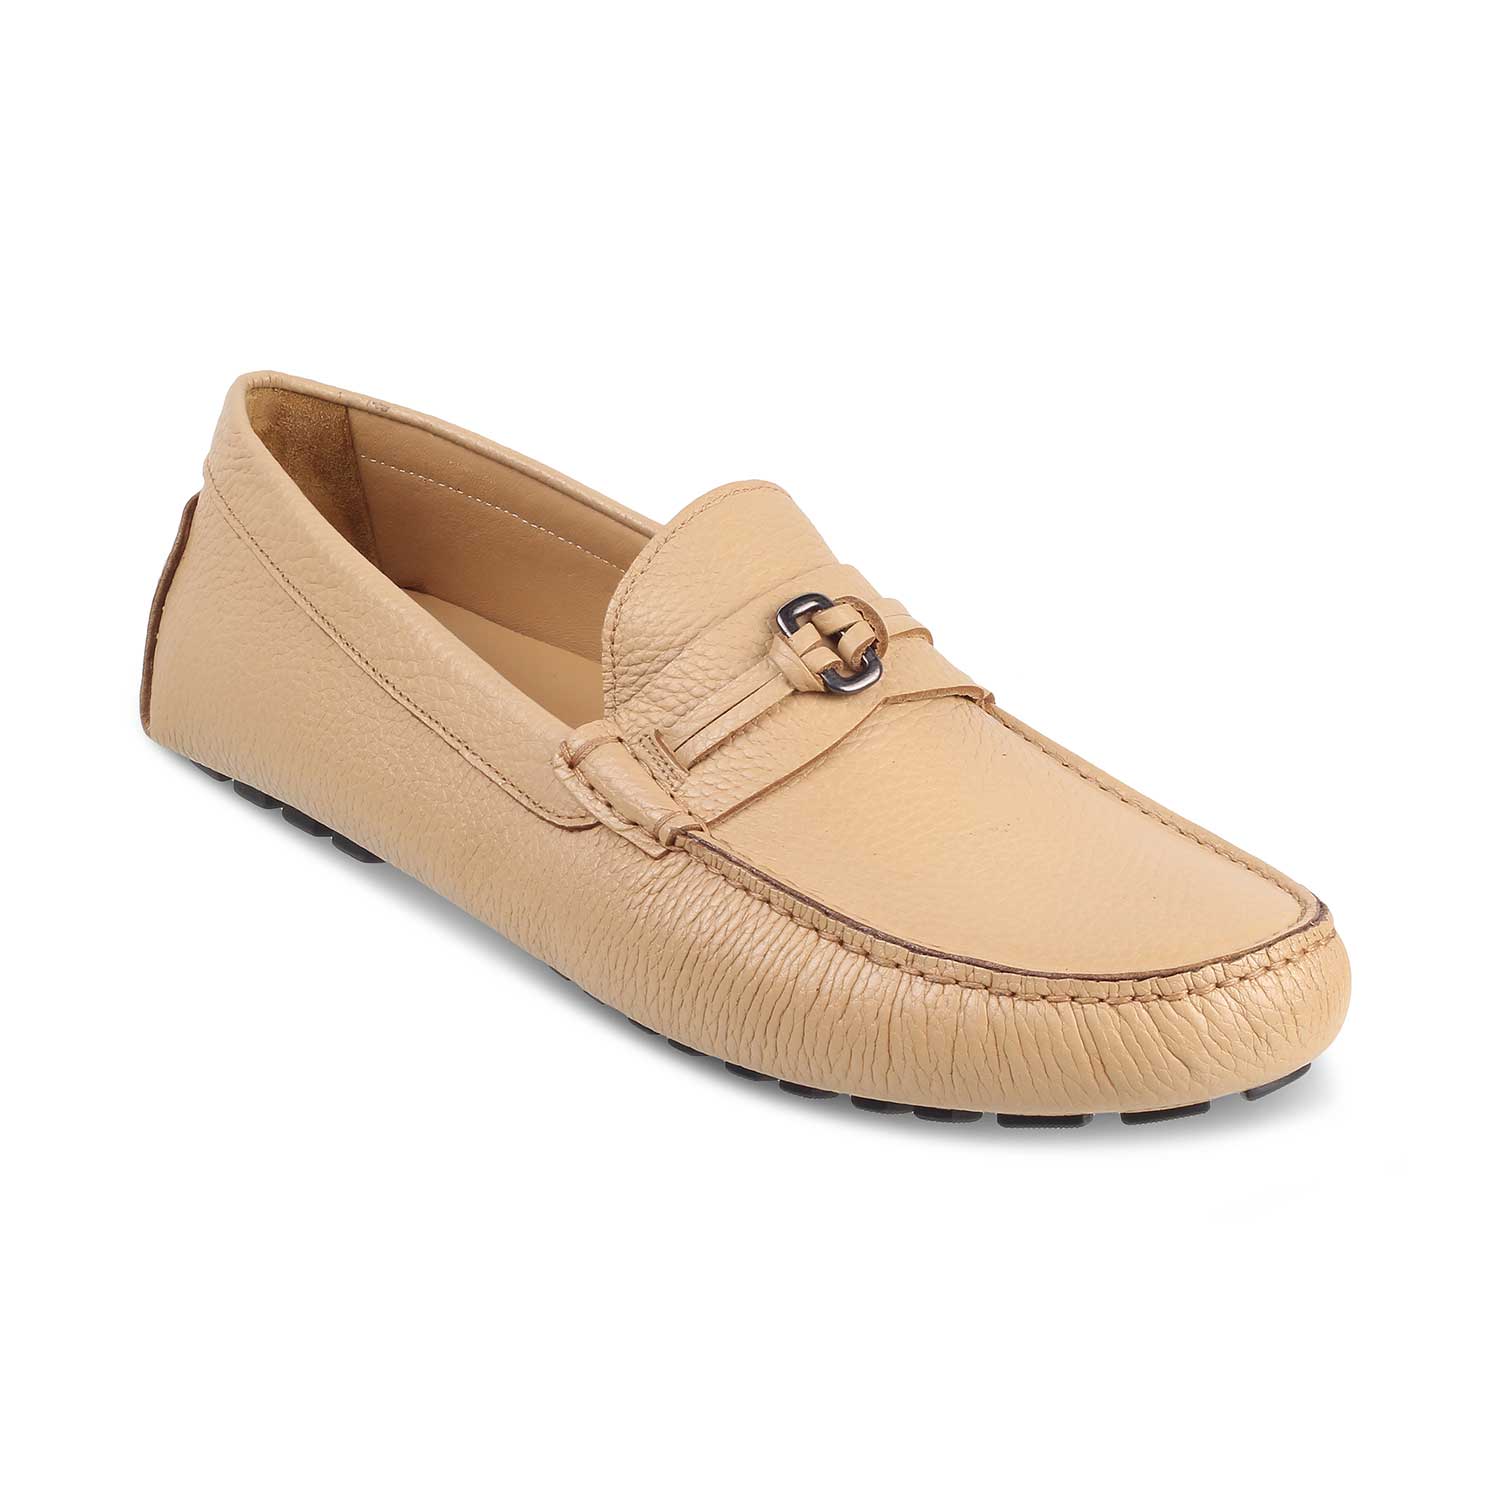 Tresmode-The Yacht Tan Men's Handcrafted Leather Driving Loafers Tresmode-Tresmode